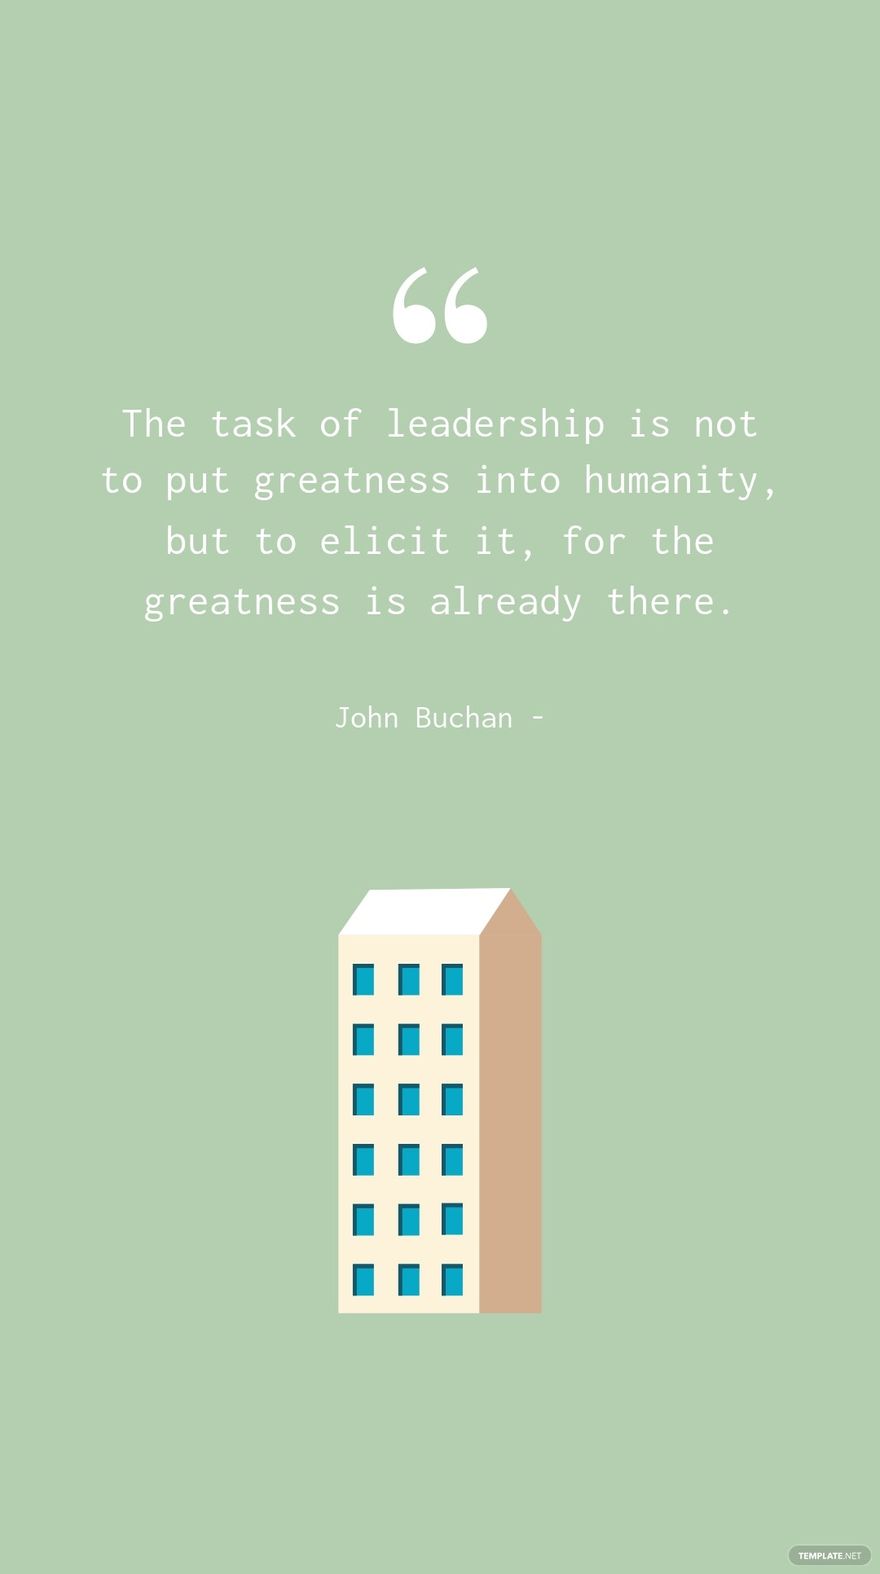 Free John Buchan - The task of leadership is not to put greatness into humanity, but to elicit it, for the greatness is already there. in JPG